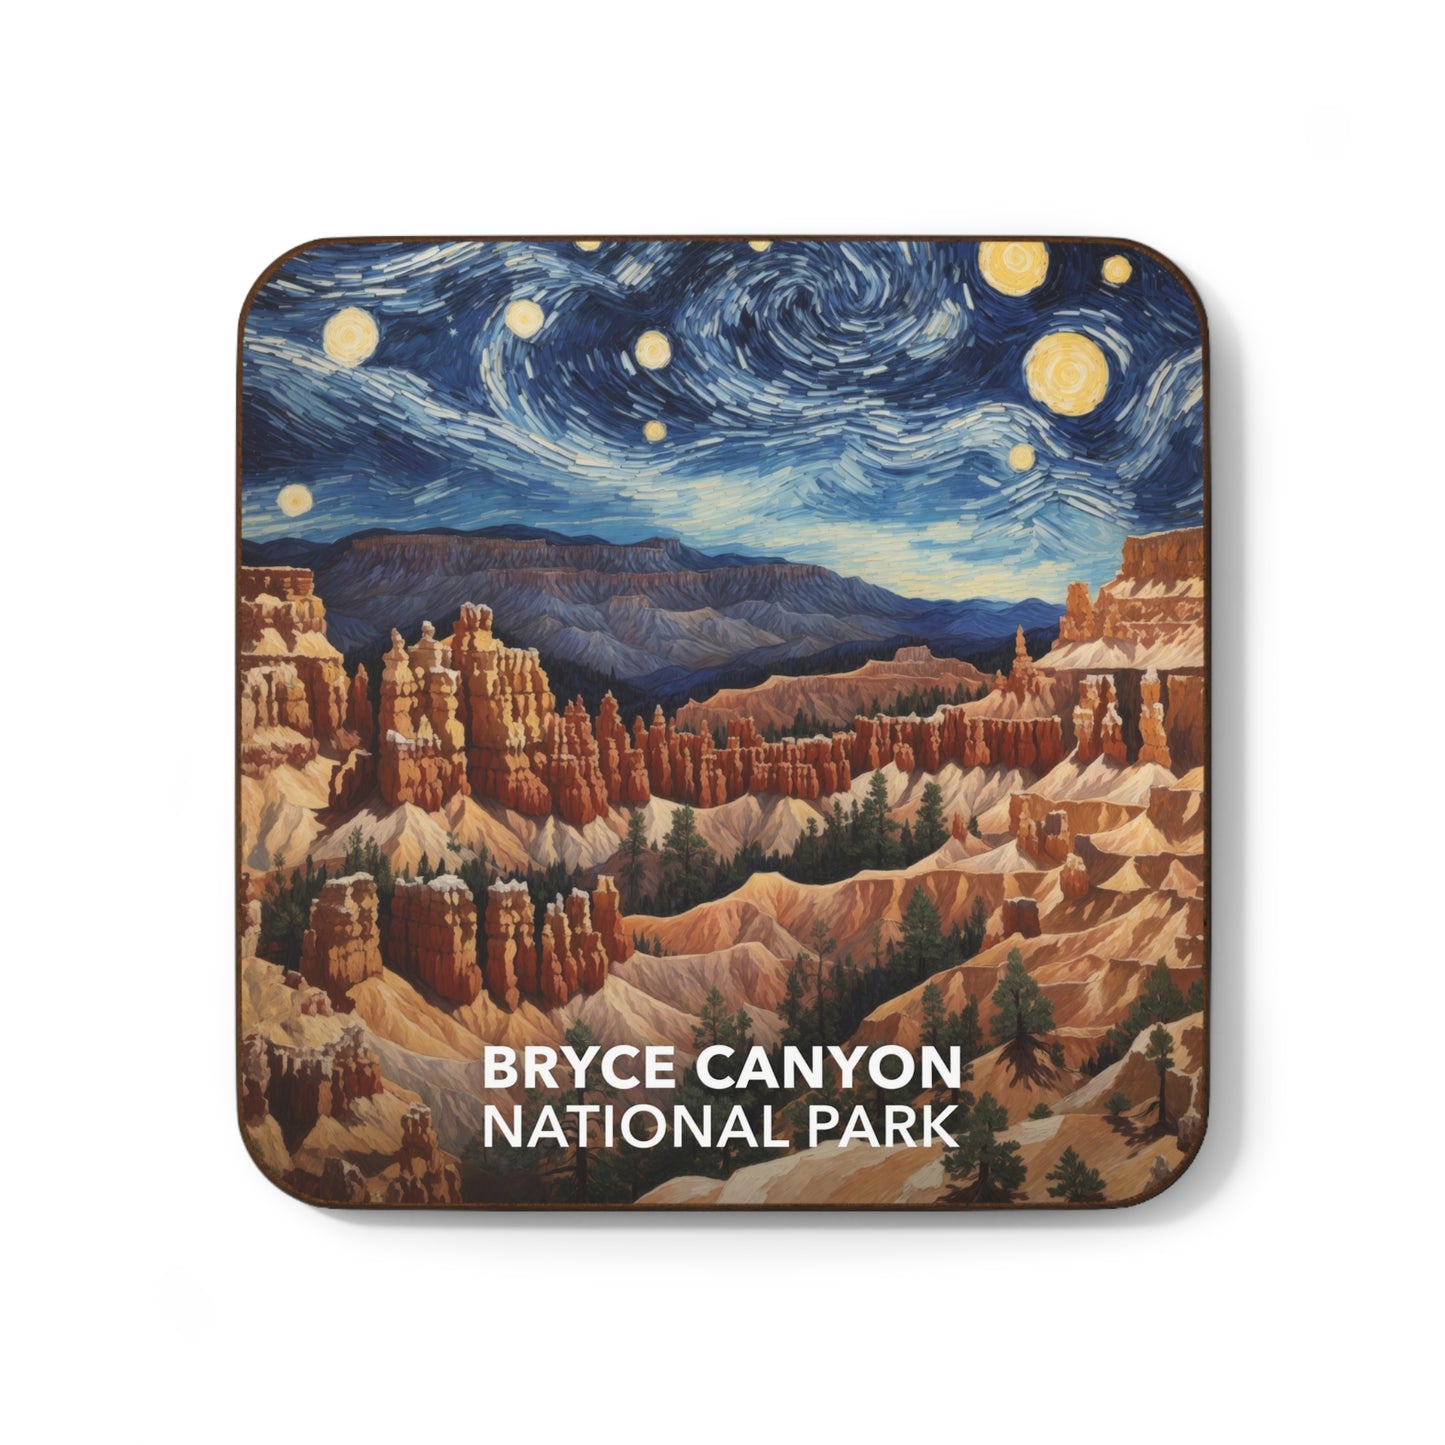 Bryce Canyon National Park Coaster - The Starry Night